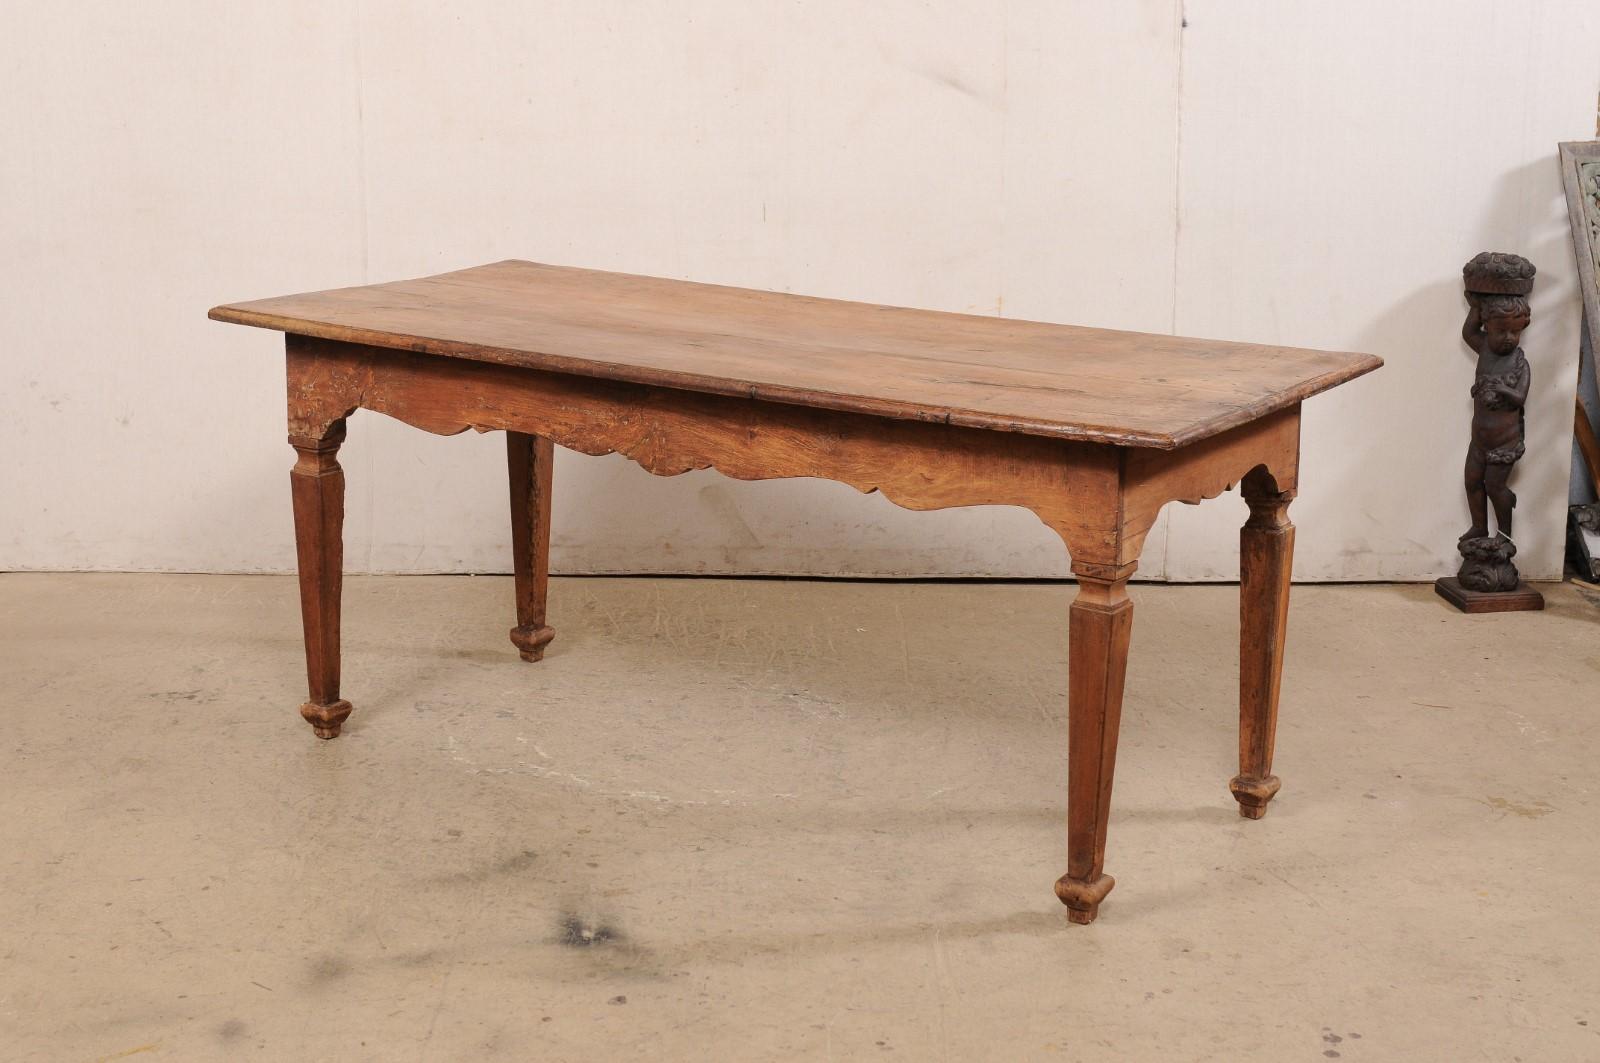 A Late 18th C. Italian Walnut Farm Table with Carved Skirt, 6 Ft Long For Sale 6